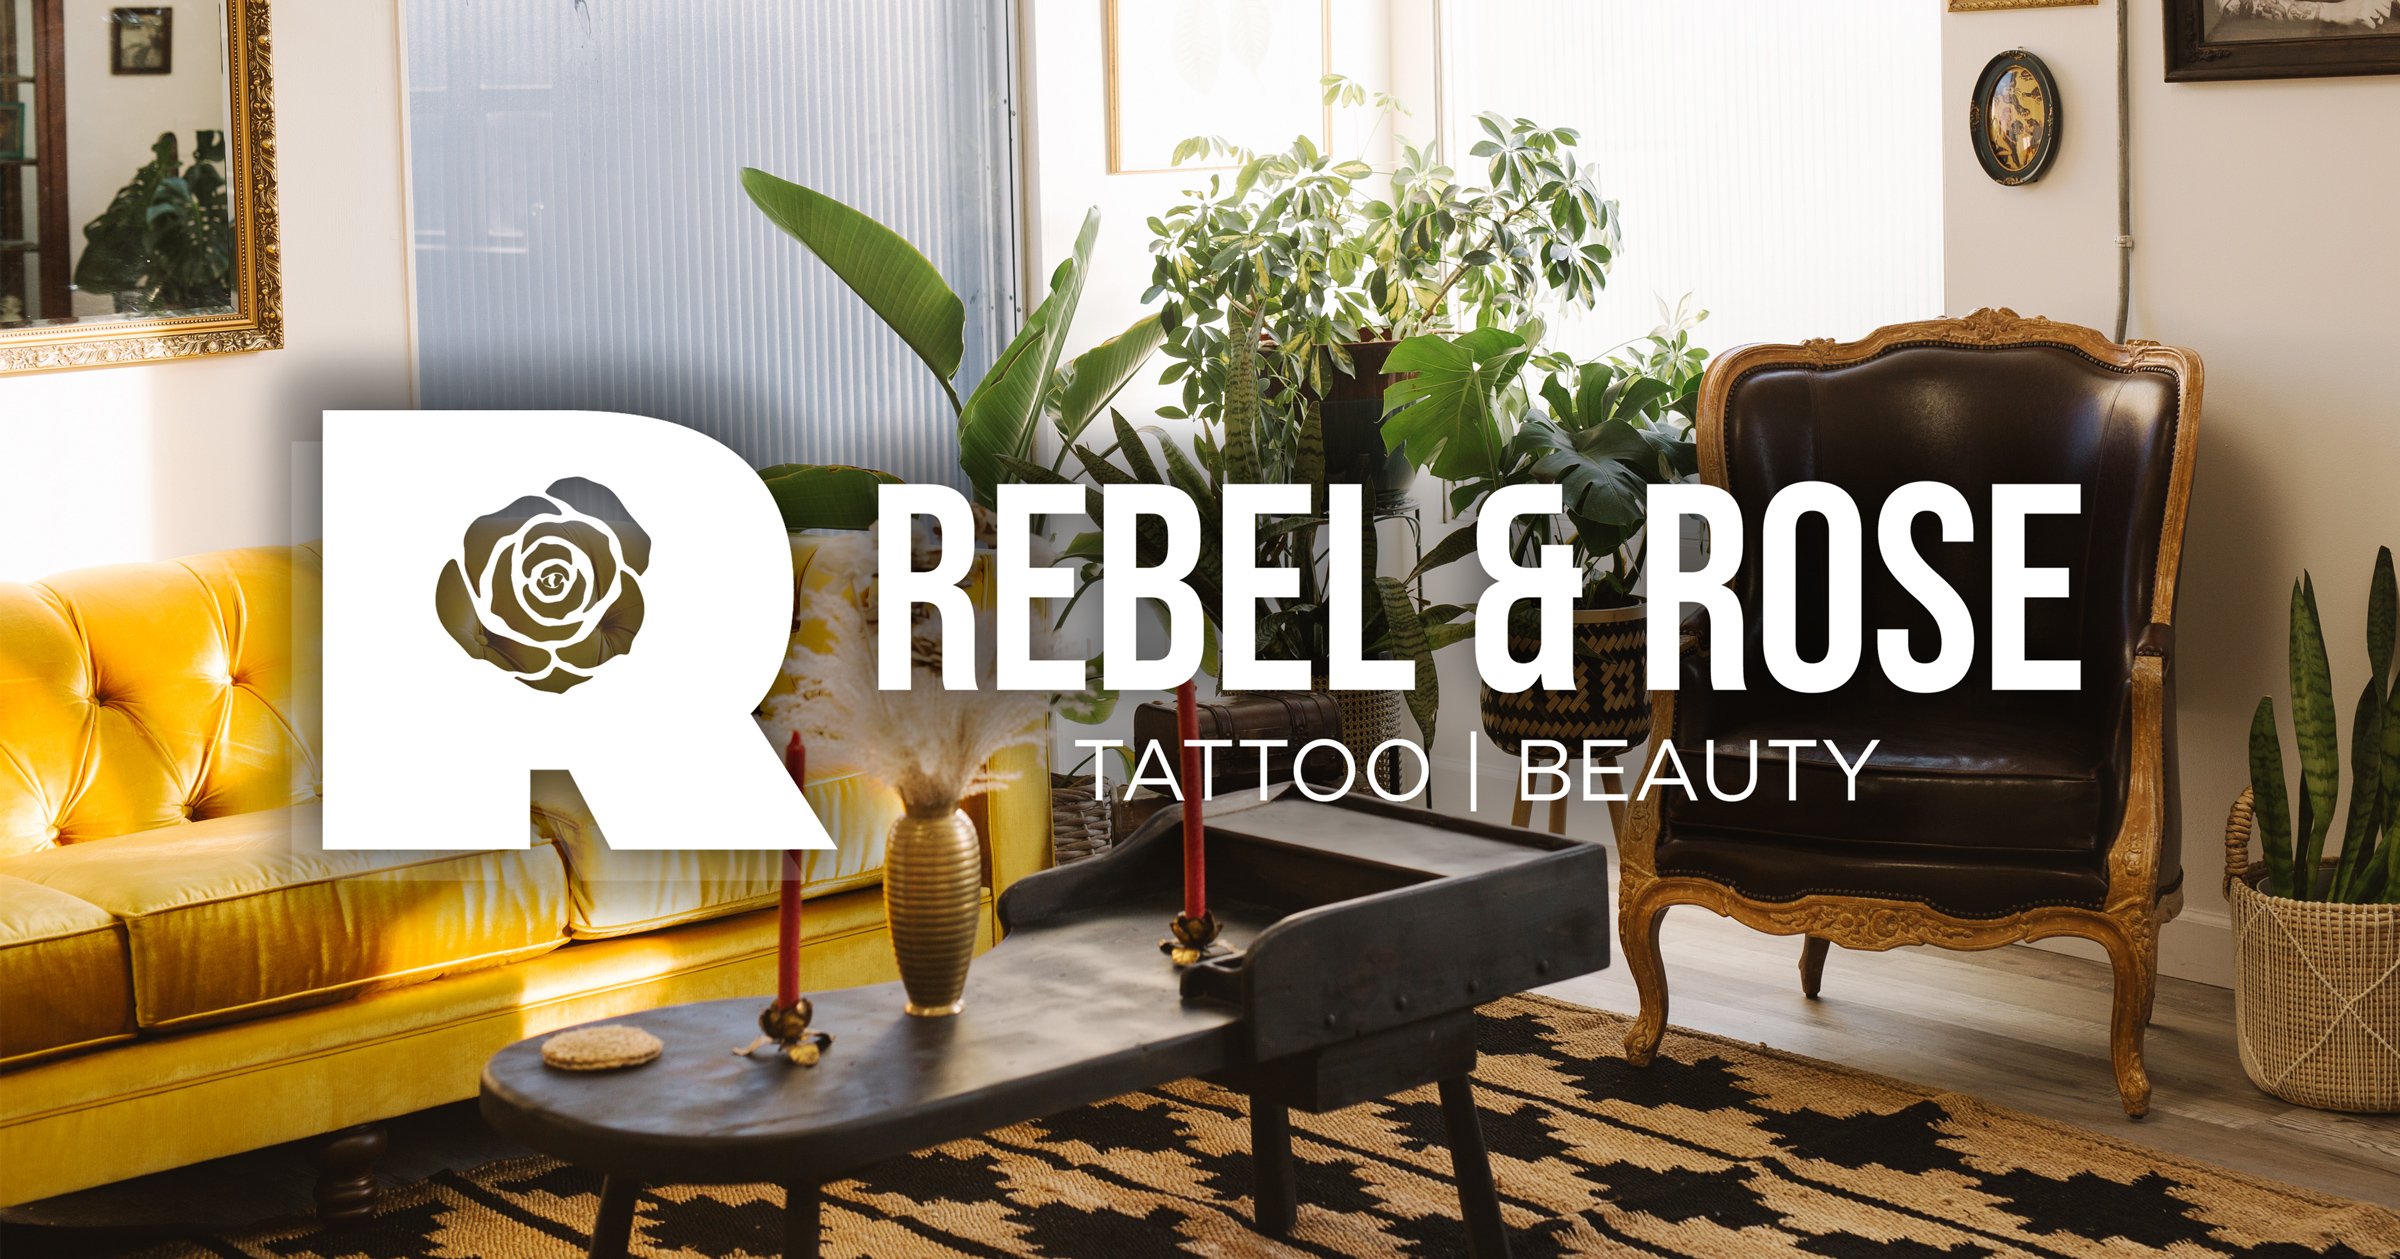 Rebel Muse Tattoo Studio  Did you know cassandrakeeltattoo loves tattooing  floral designs Which bunch of flowers would you get tattooed on you  realism roses floraltattoo halfsleeve tattoolover  Facebook